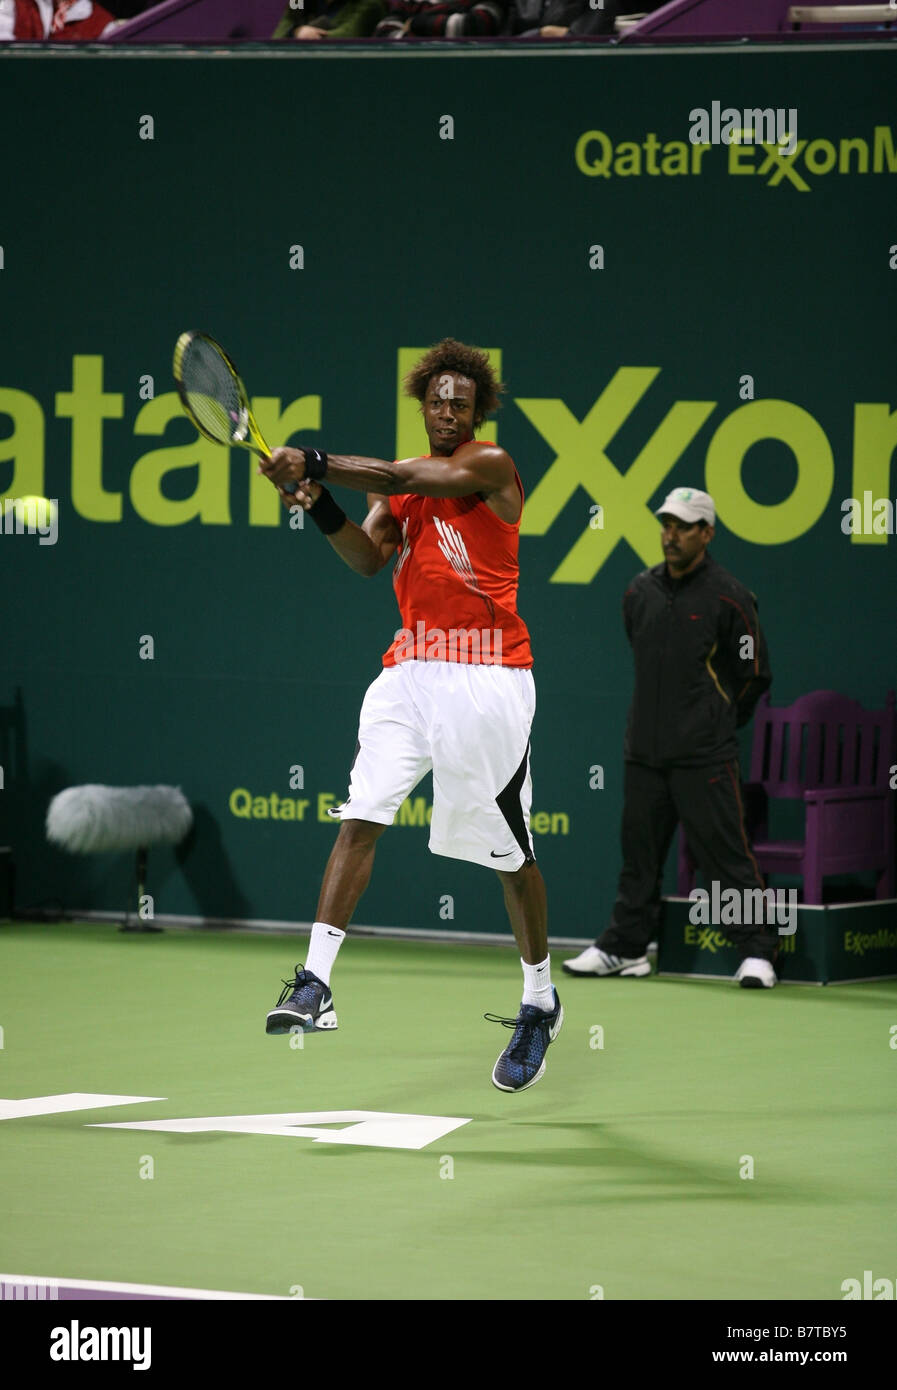 Gael Monfils delivers a double handed backhand to return the ball left during his victory over world No 1 Rafael Nadal in Qatar Stock Photo